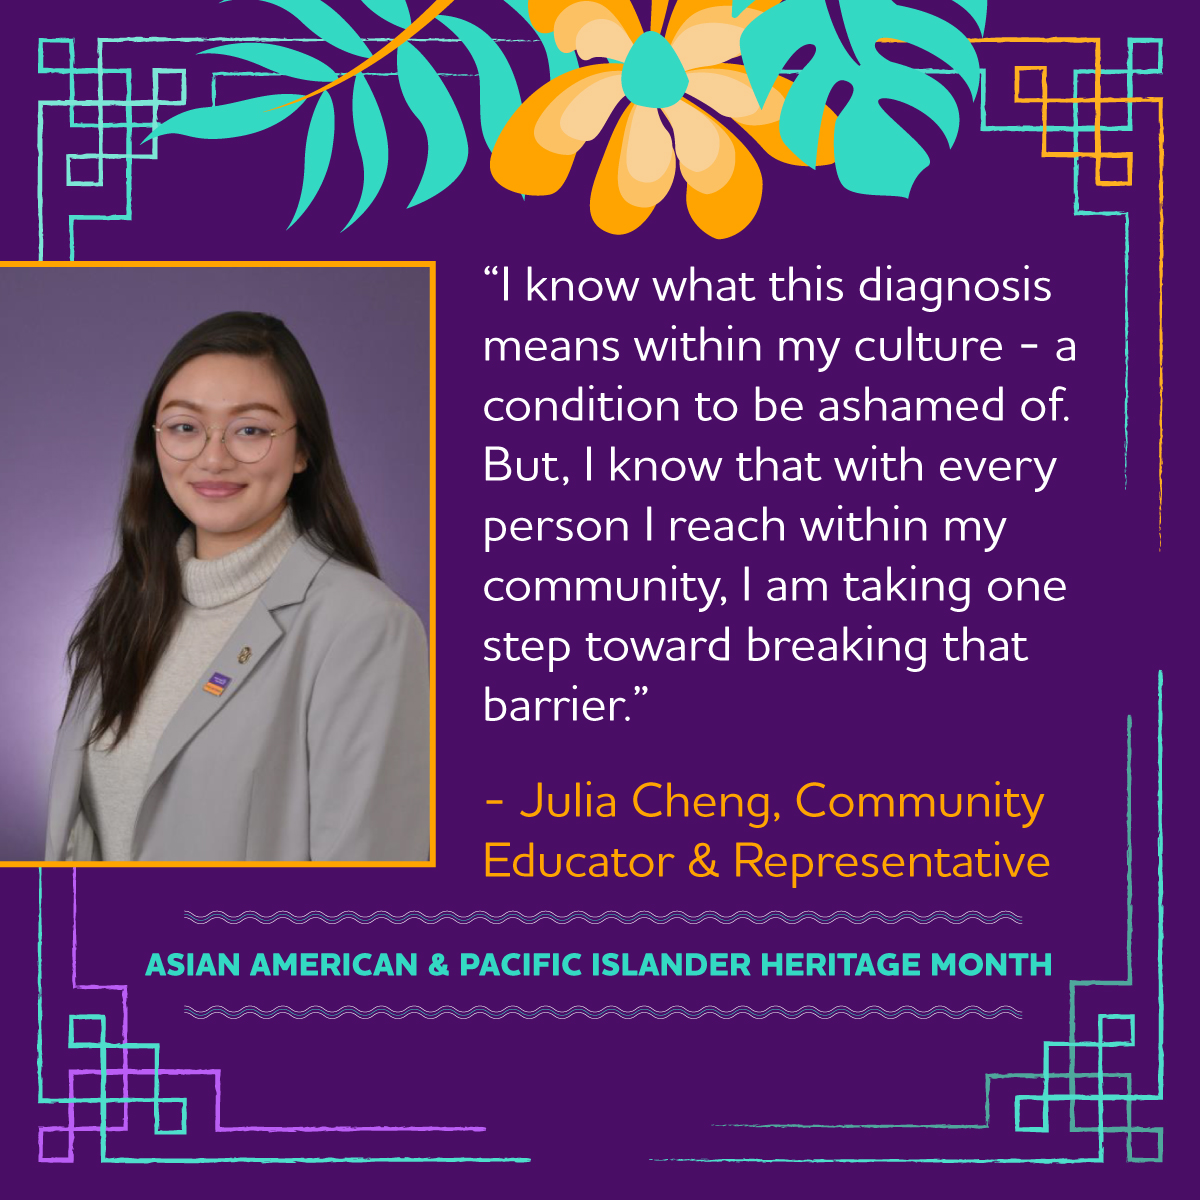 Julia volunteers in her community to extend the reach of our education programs while working to reduce the stigma associated with Alzheimer’s and other dementia. Because of Julia, others feel less alone and are better equipped to face the disease. #AAPIMonth